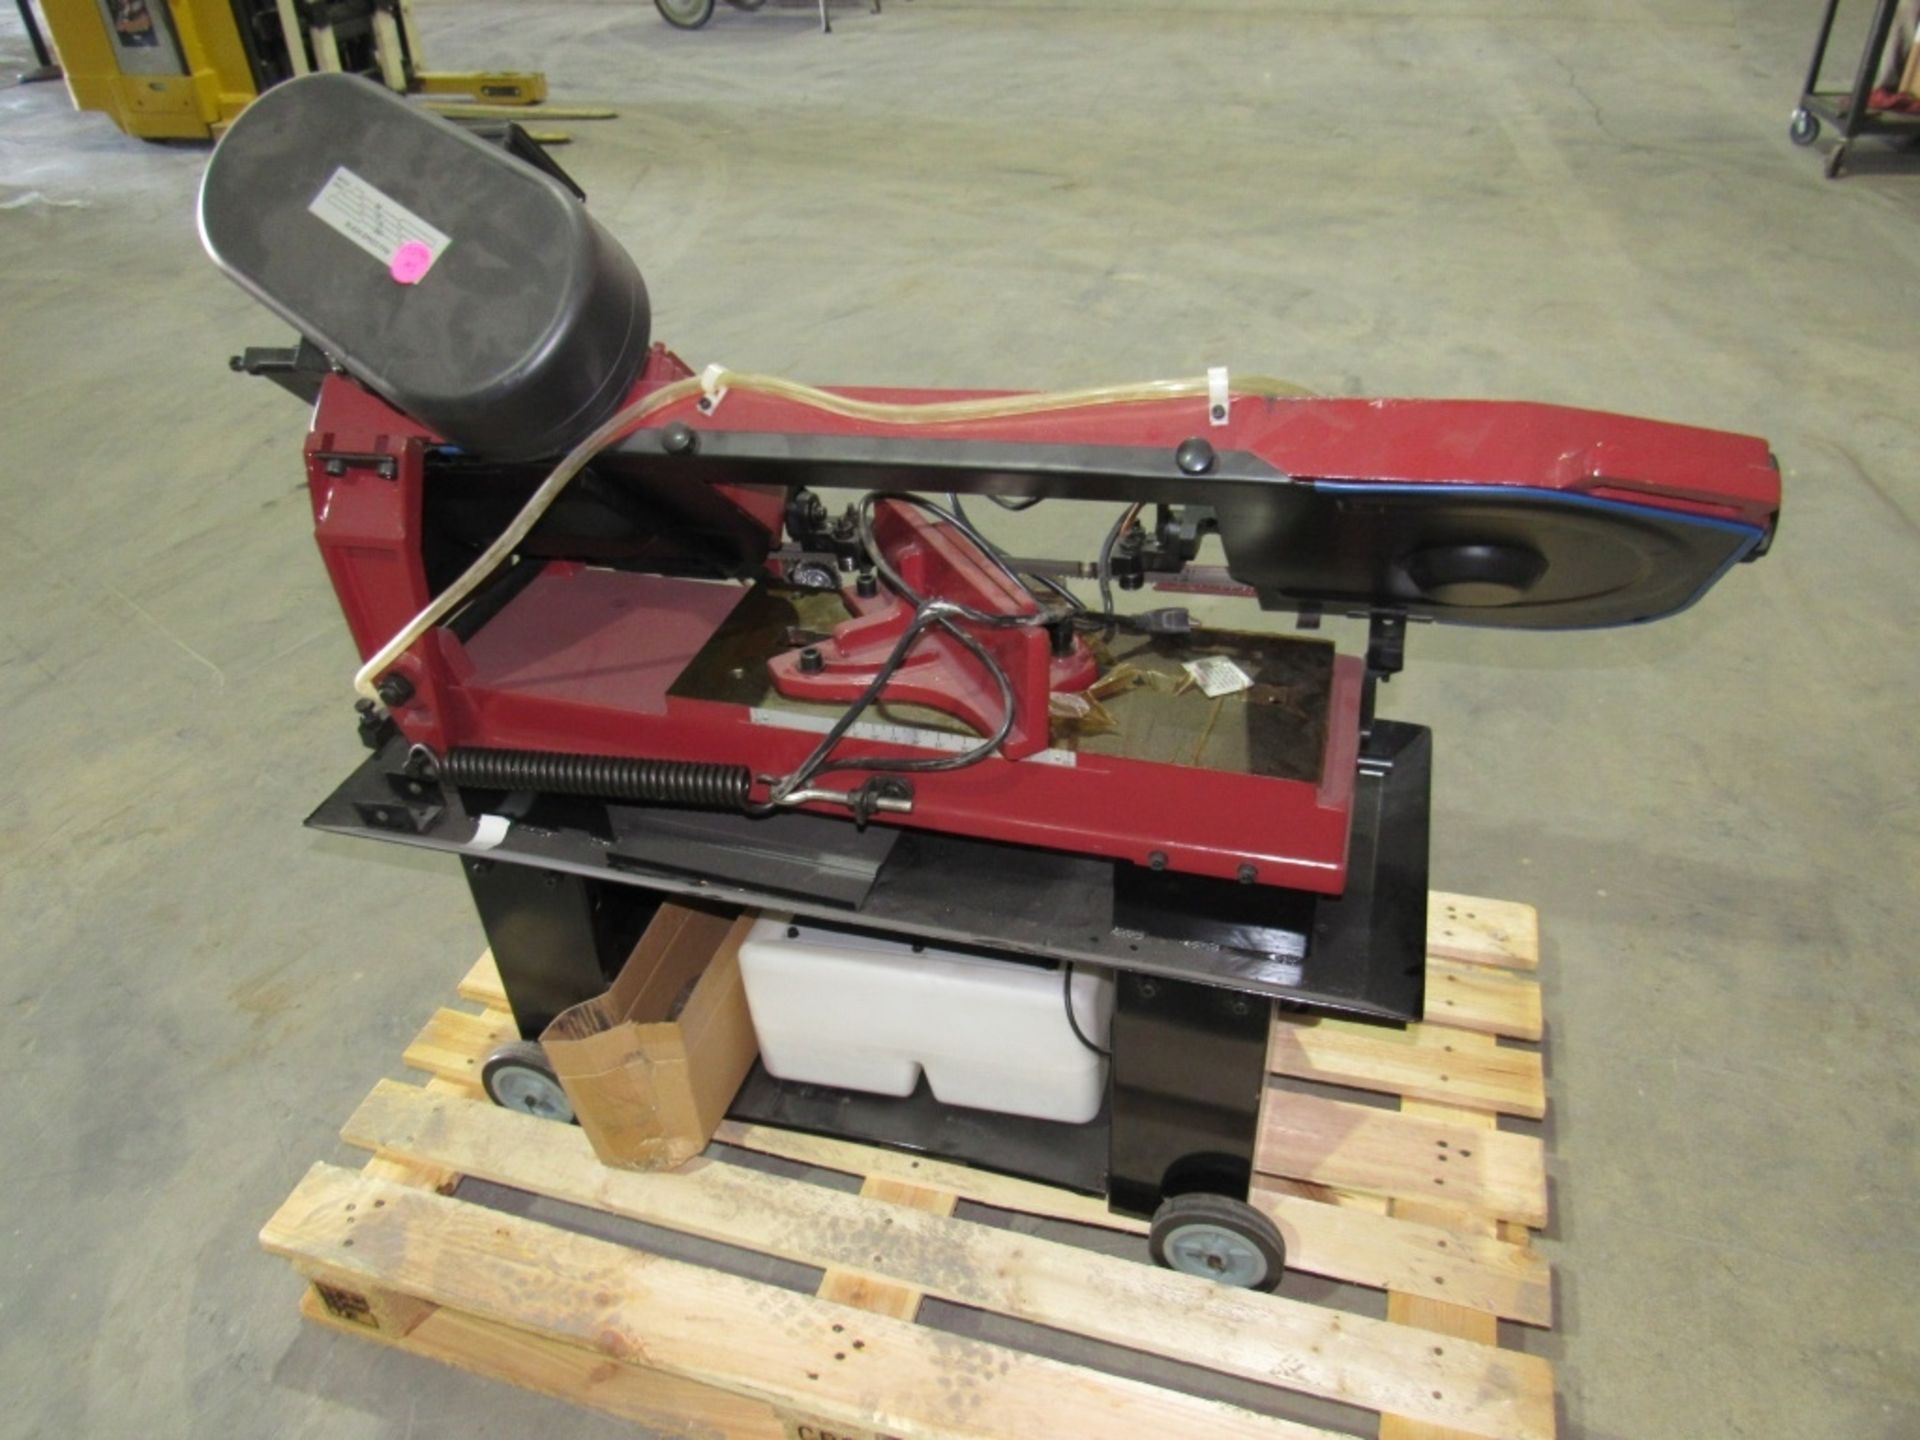 Metal Band Saw- Model - BS-712N 1.1 KW 115/230 Volts 1 Phase 60 Hz Overall Dimensions - 4' x 16" x - Image 3 of 14